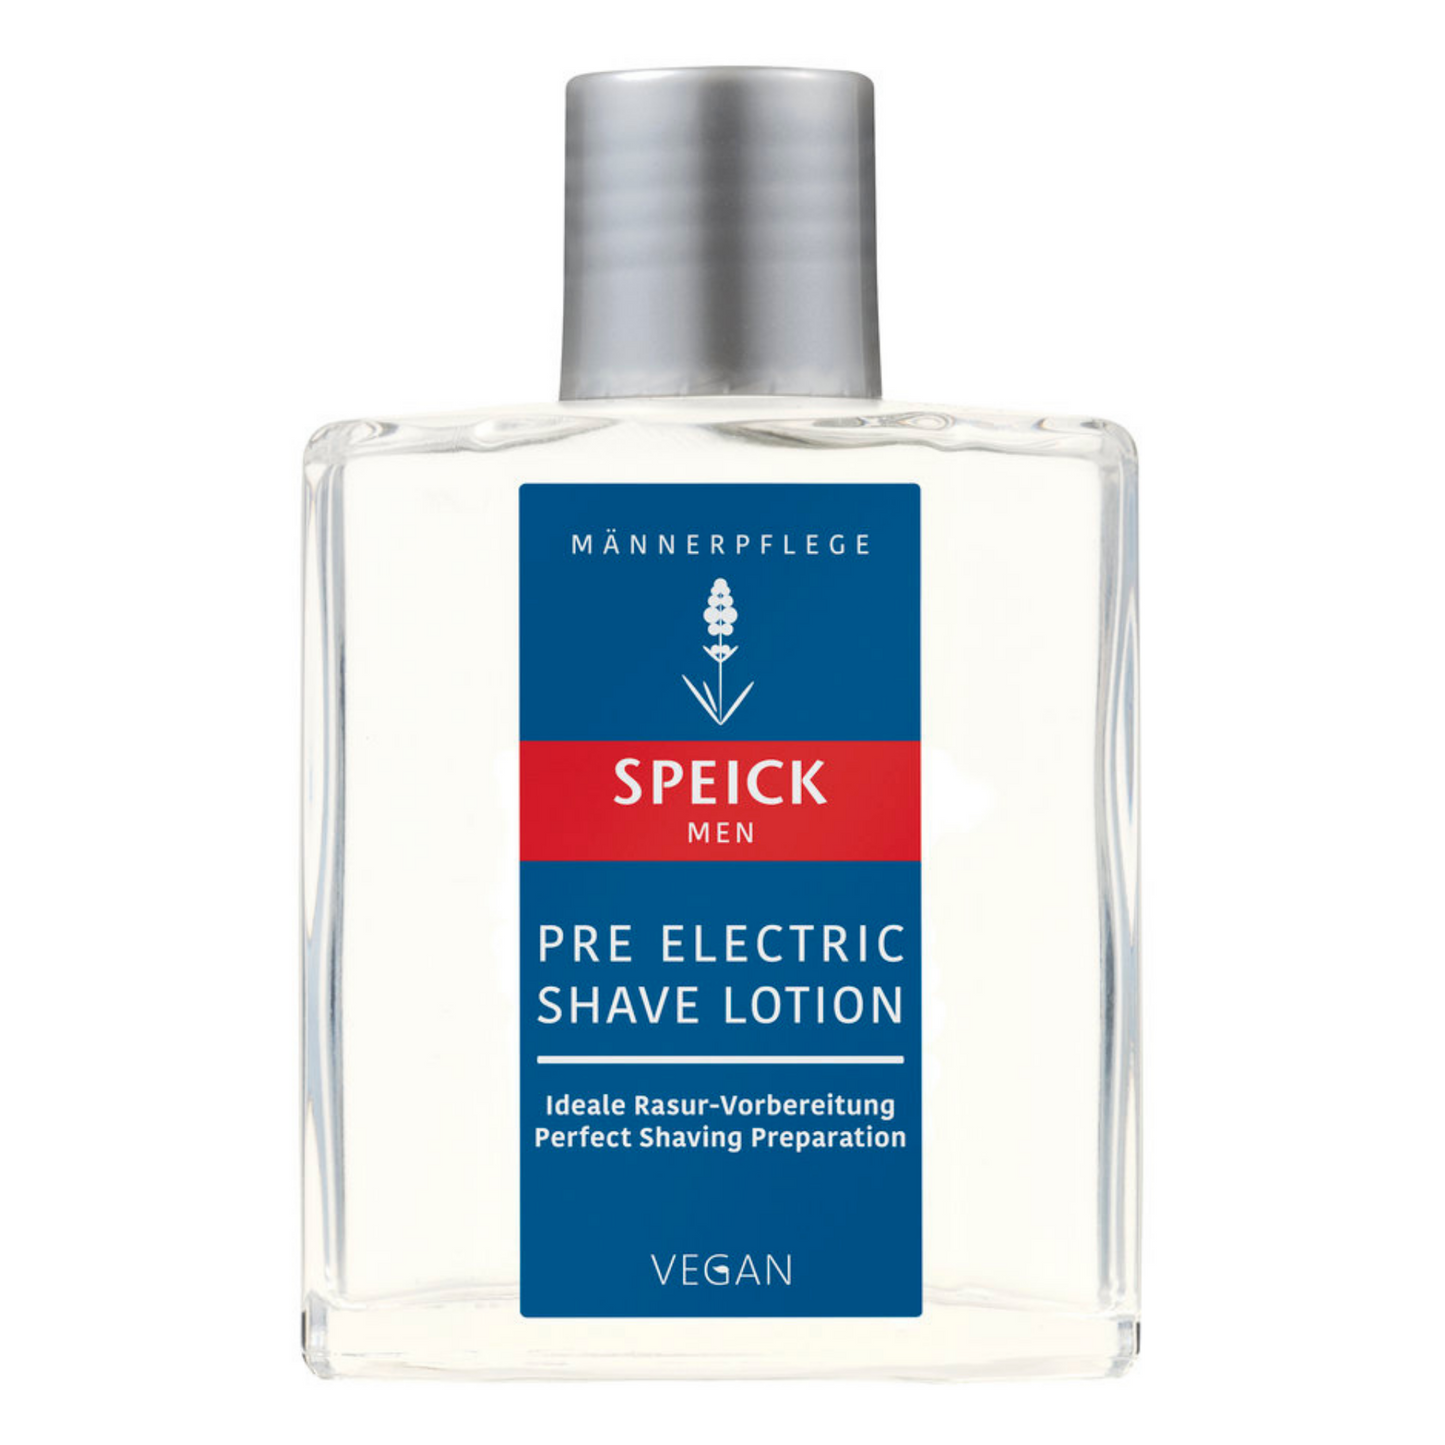 Primary image of Pre Electric Shave Lotion